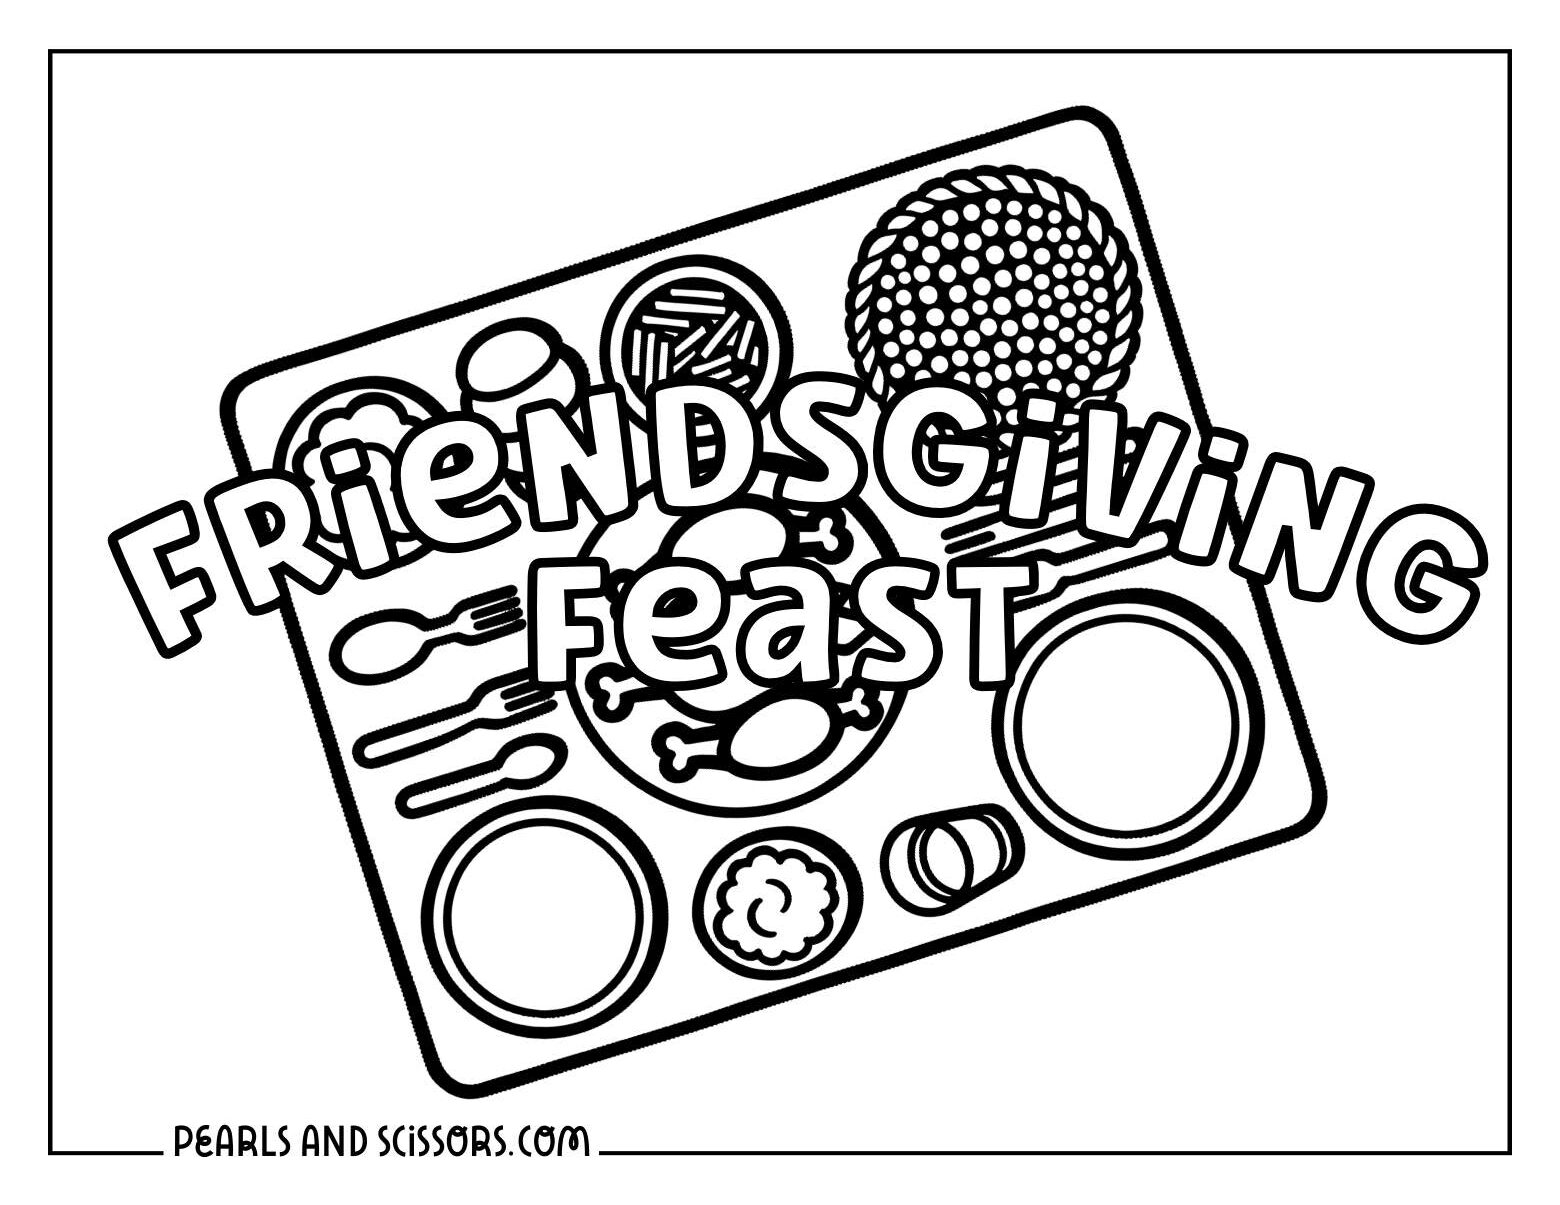 Friendsgiving feast for thanksgiving coloring sheet.